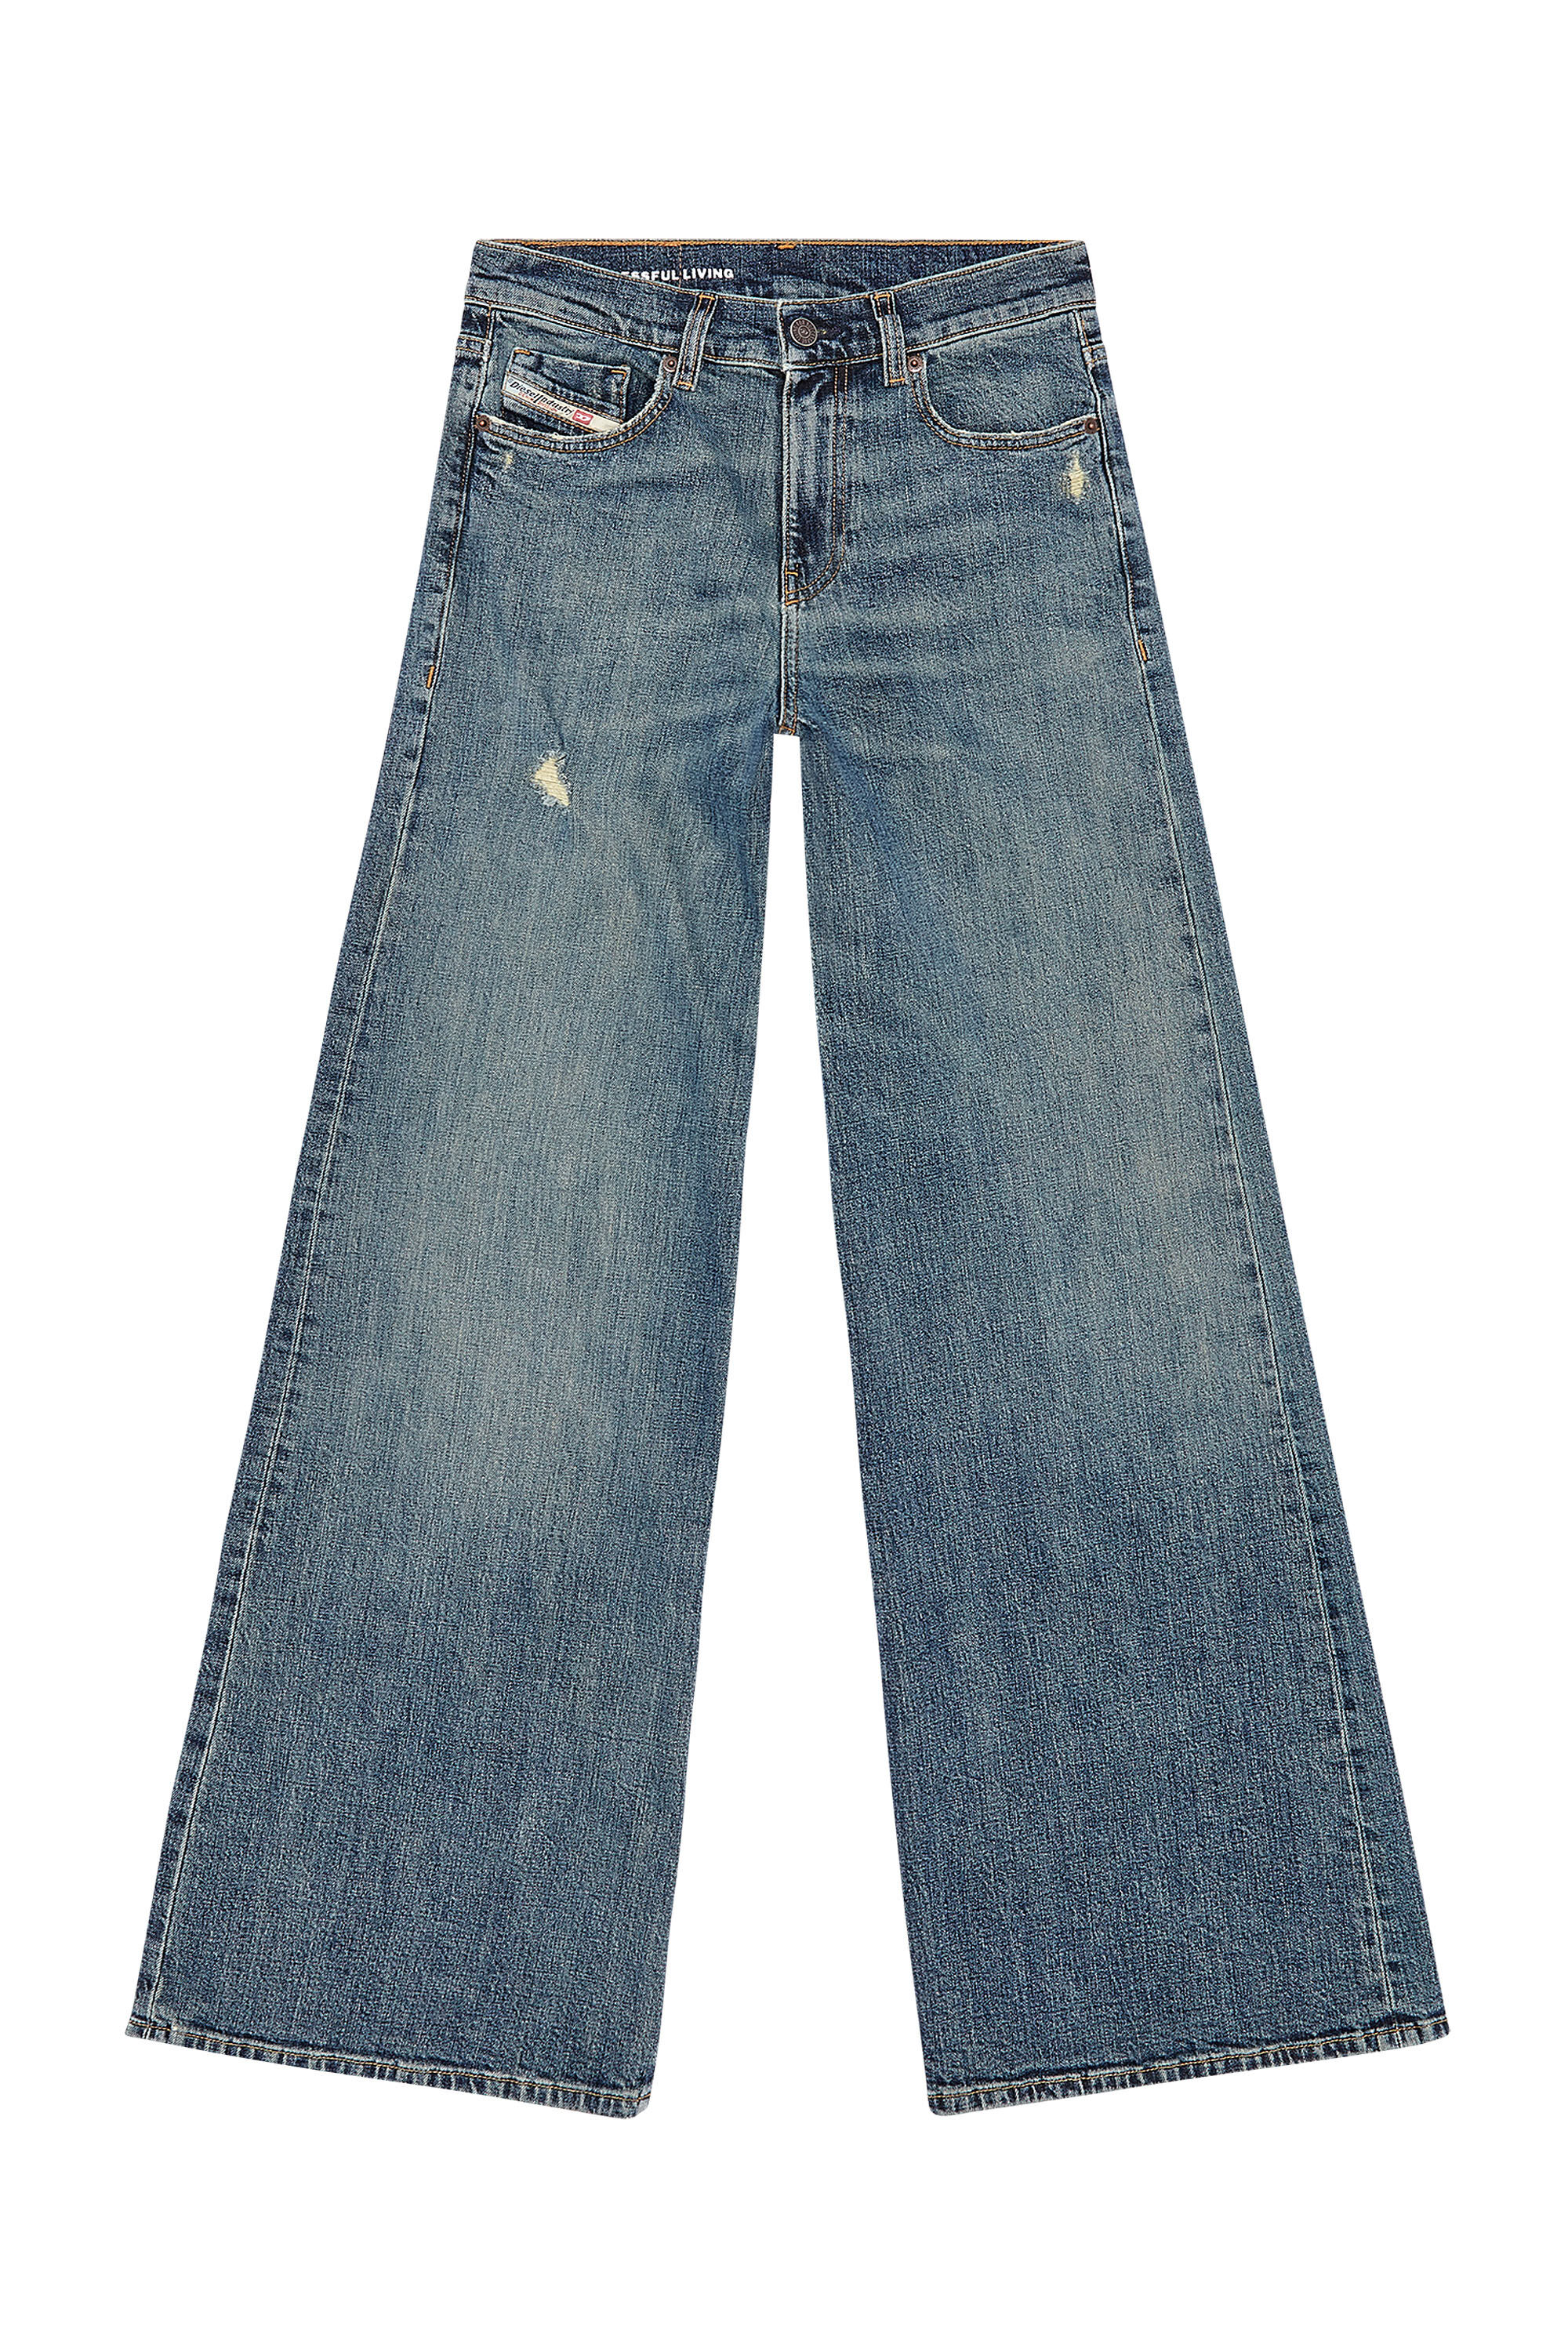 Y2k Flare Jeans -  Finland